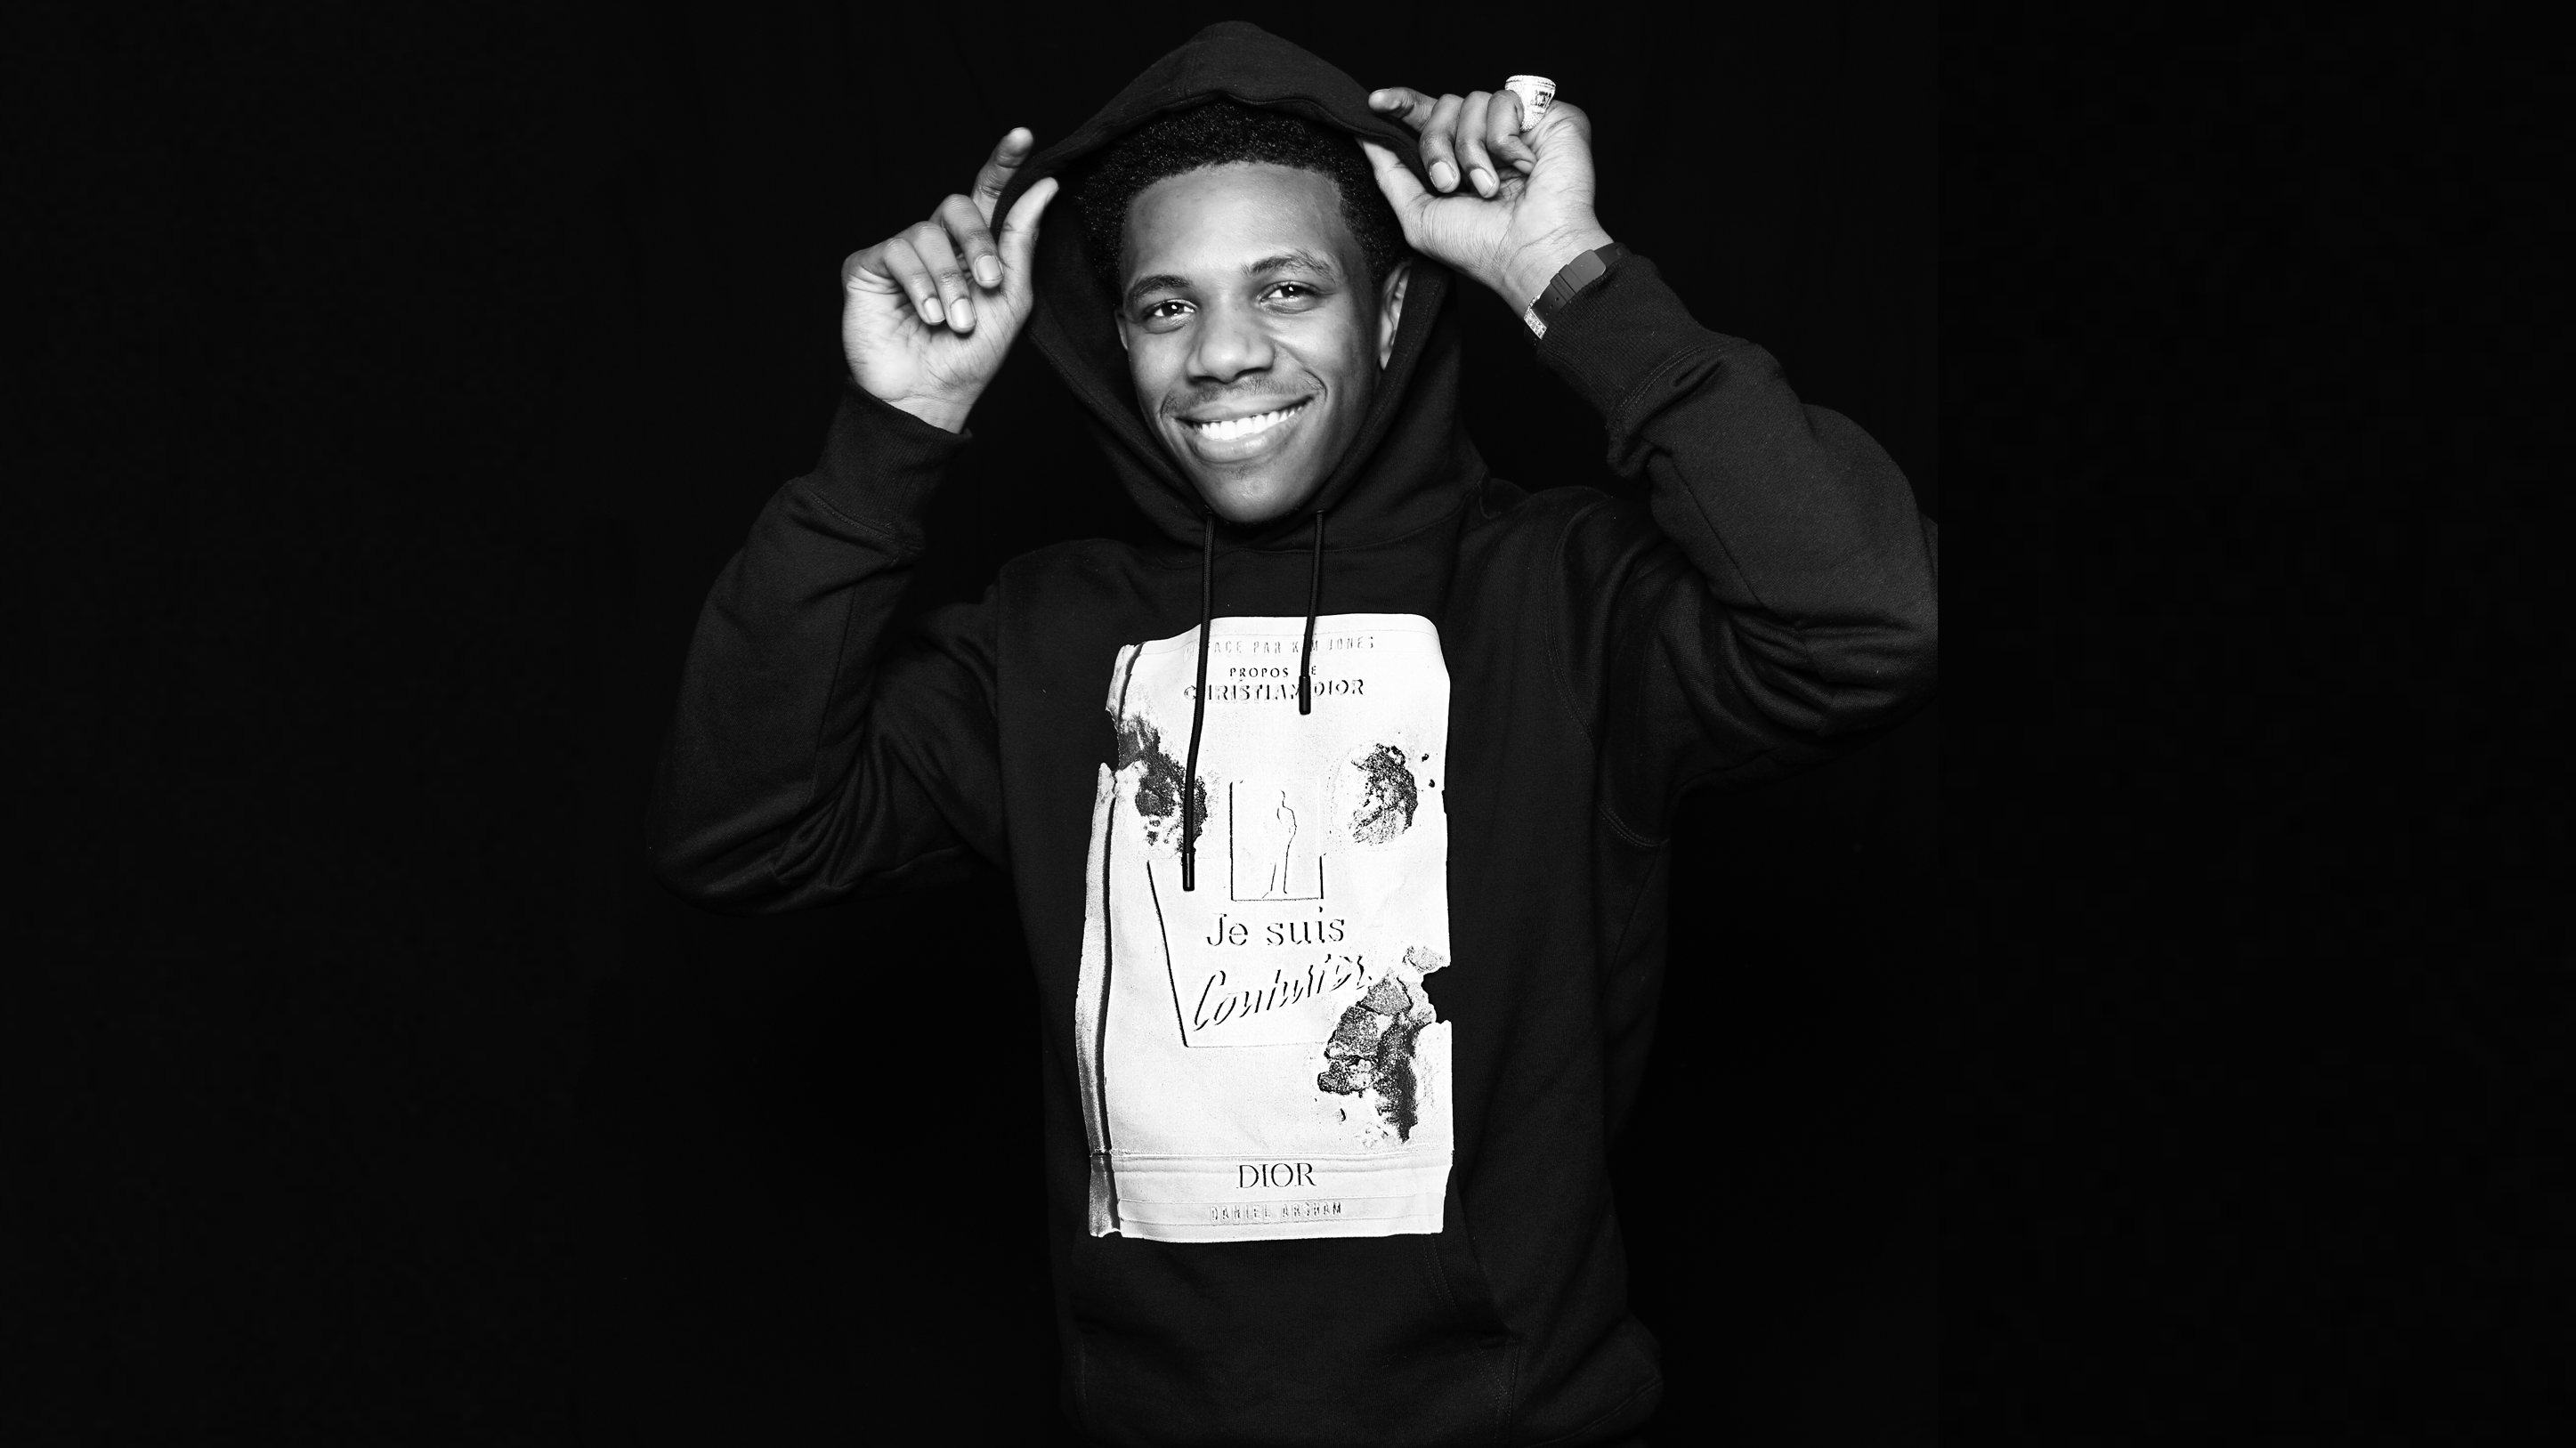 A Boogie wit da Hoodie breaks down samples on his latest album